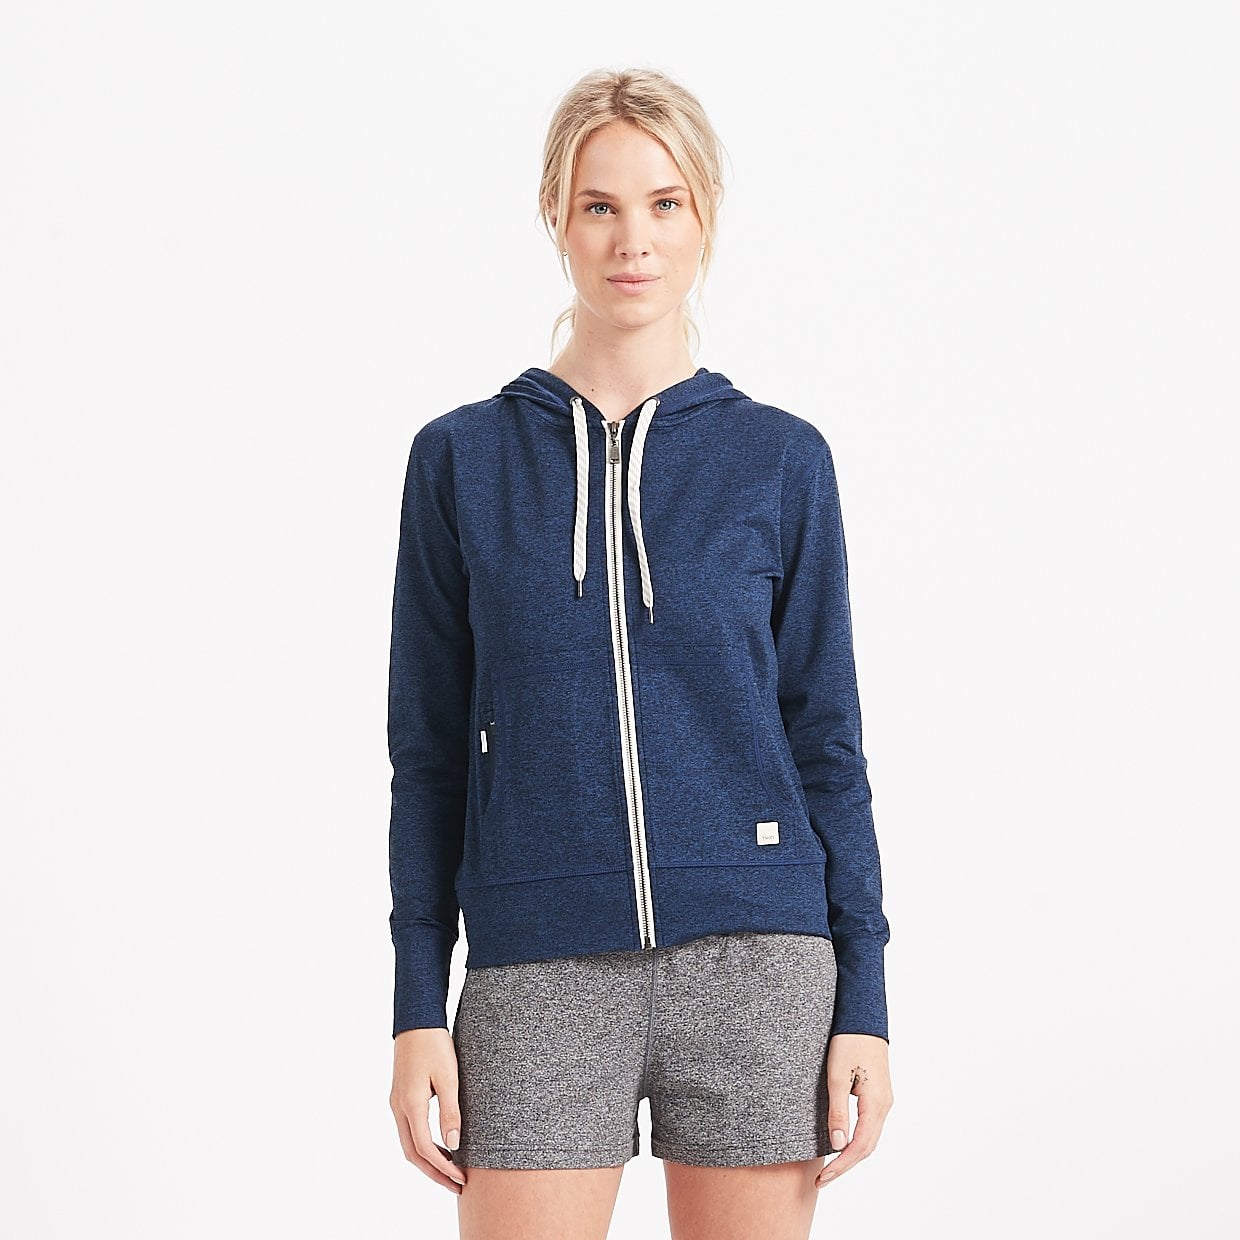 A Zip Up Sweatshirt: Vuori Halo Performance Hoodie, If You're Looking For  Activewear That'll Never Go Out of Style, Try Vuori